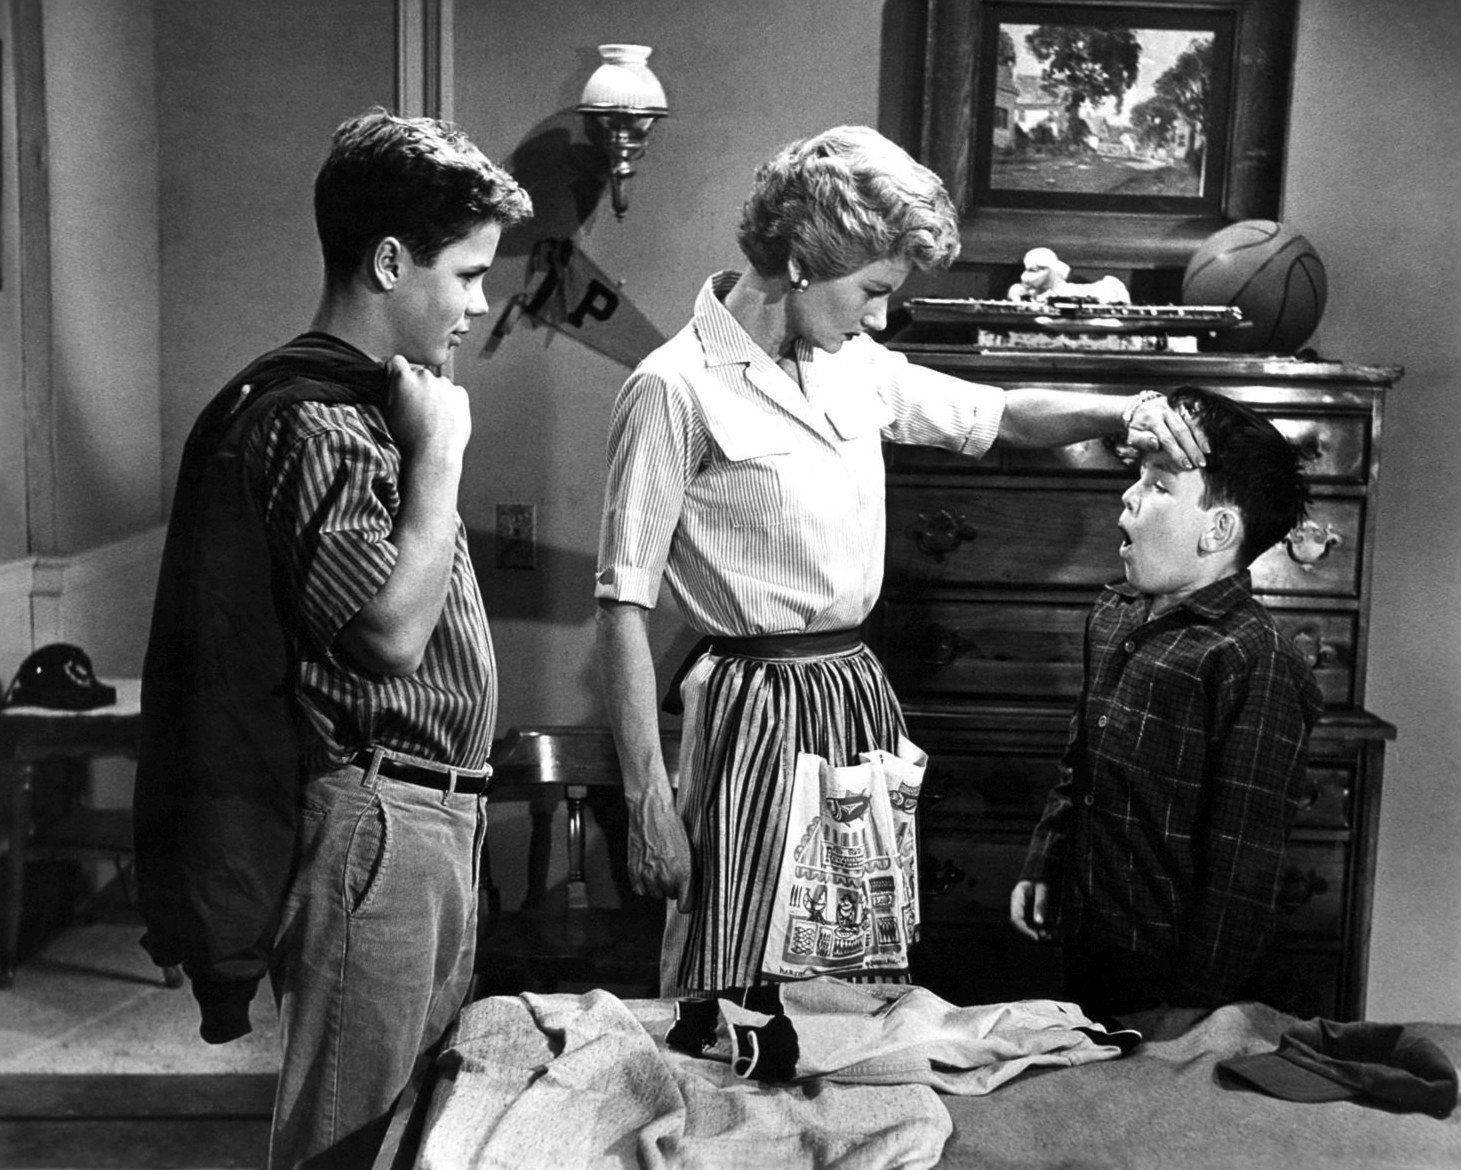 Tony Dow, Barbara Billingsley and Jerry Mathers in a scene from "Leave it to Beaver." | Source: Wikimedia Commons